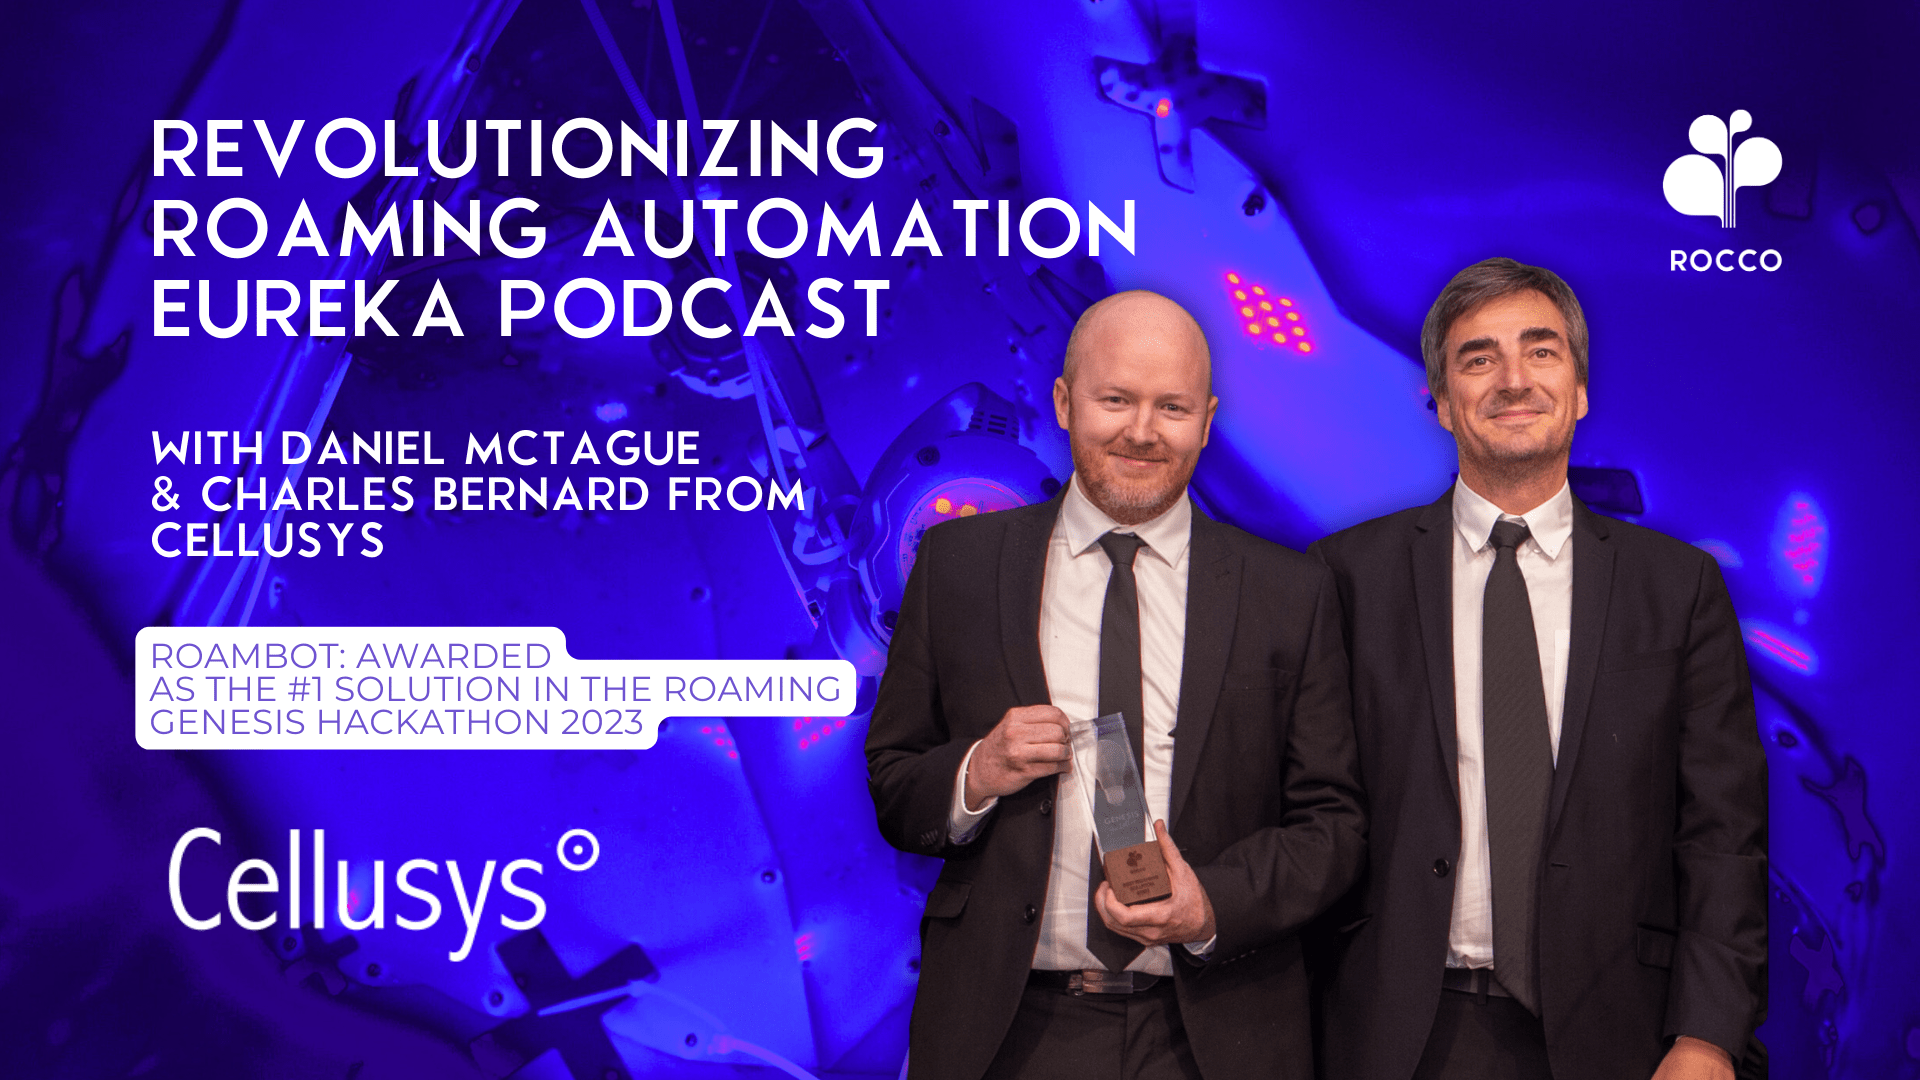 Revolutionizing Roaming Automation - A Conversation with Cellusys innovators Daniel McTague and Charles Bernard